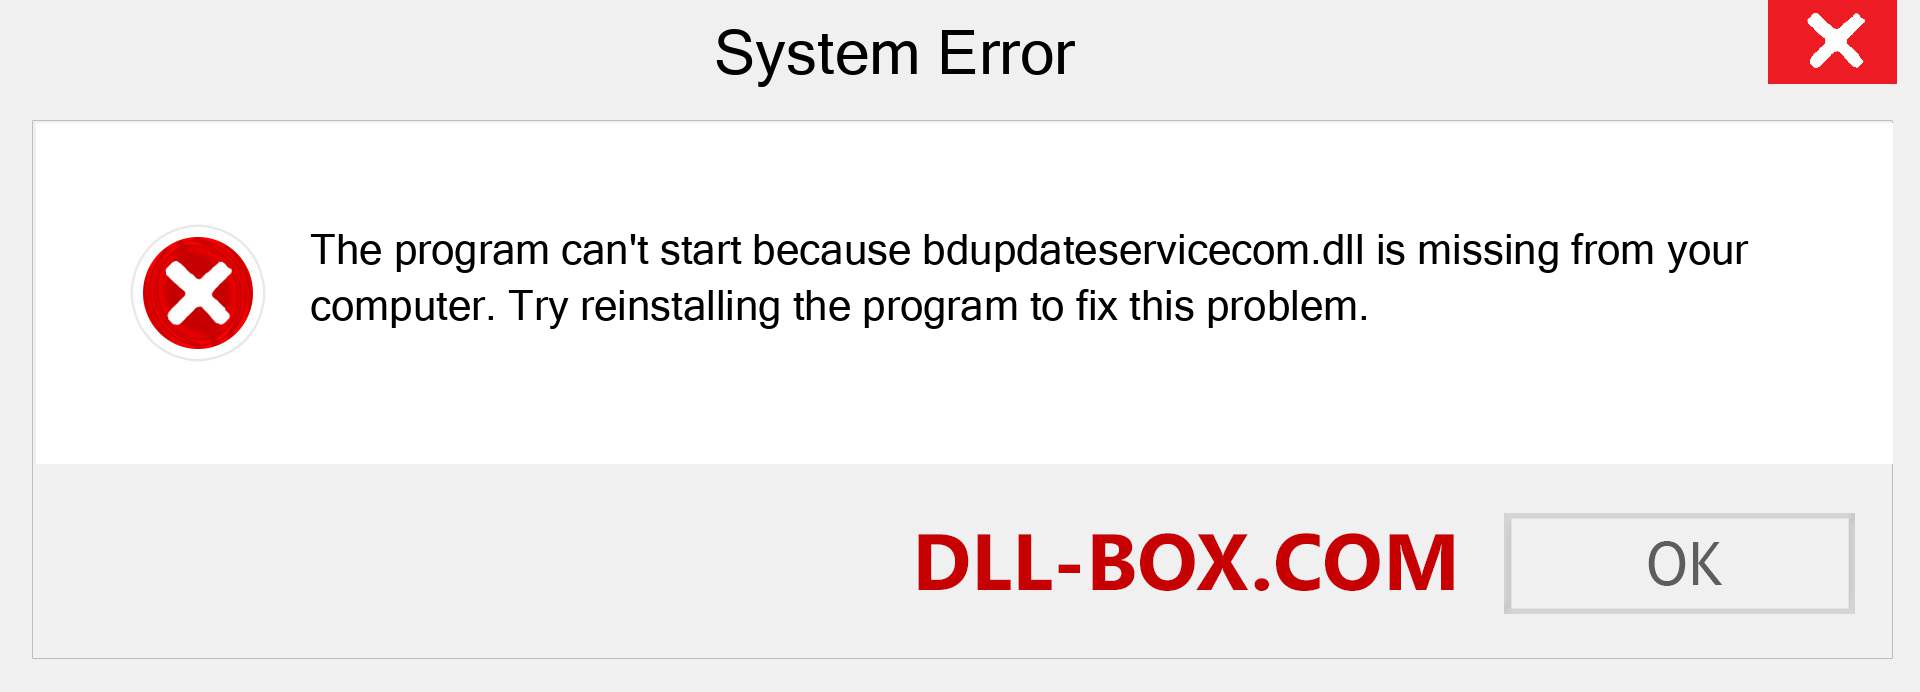  bdupdateservicecom.dll file is missing?. Download for Windows 7, 8, 10 - Fix  bdupdateservicecom dll Missing Error on Windows, photos, images